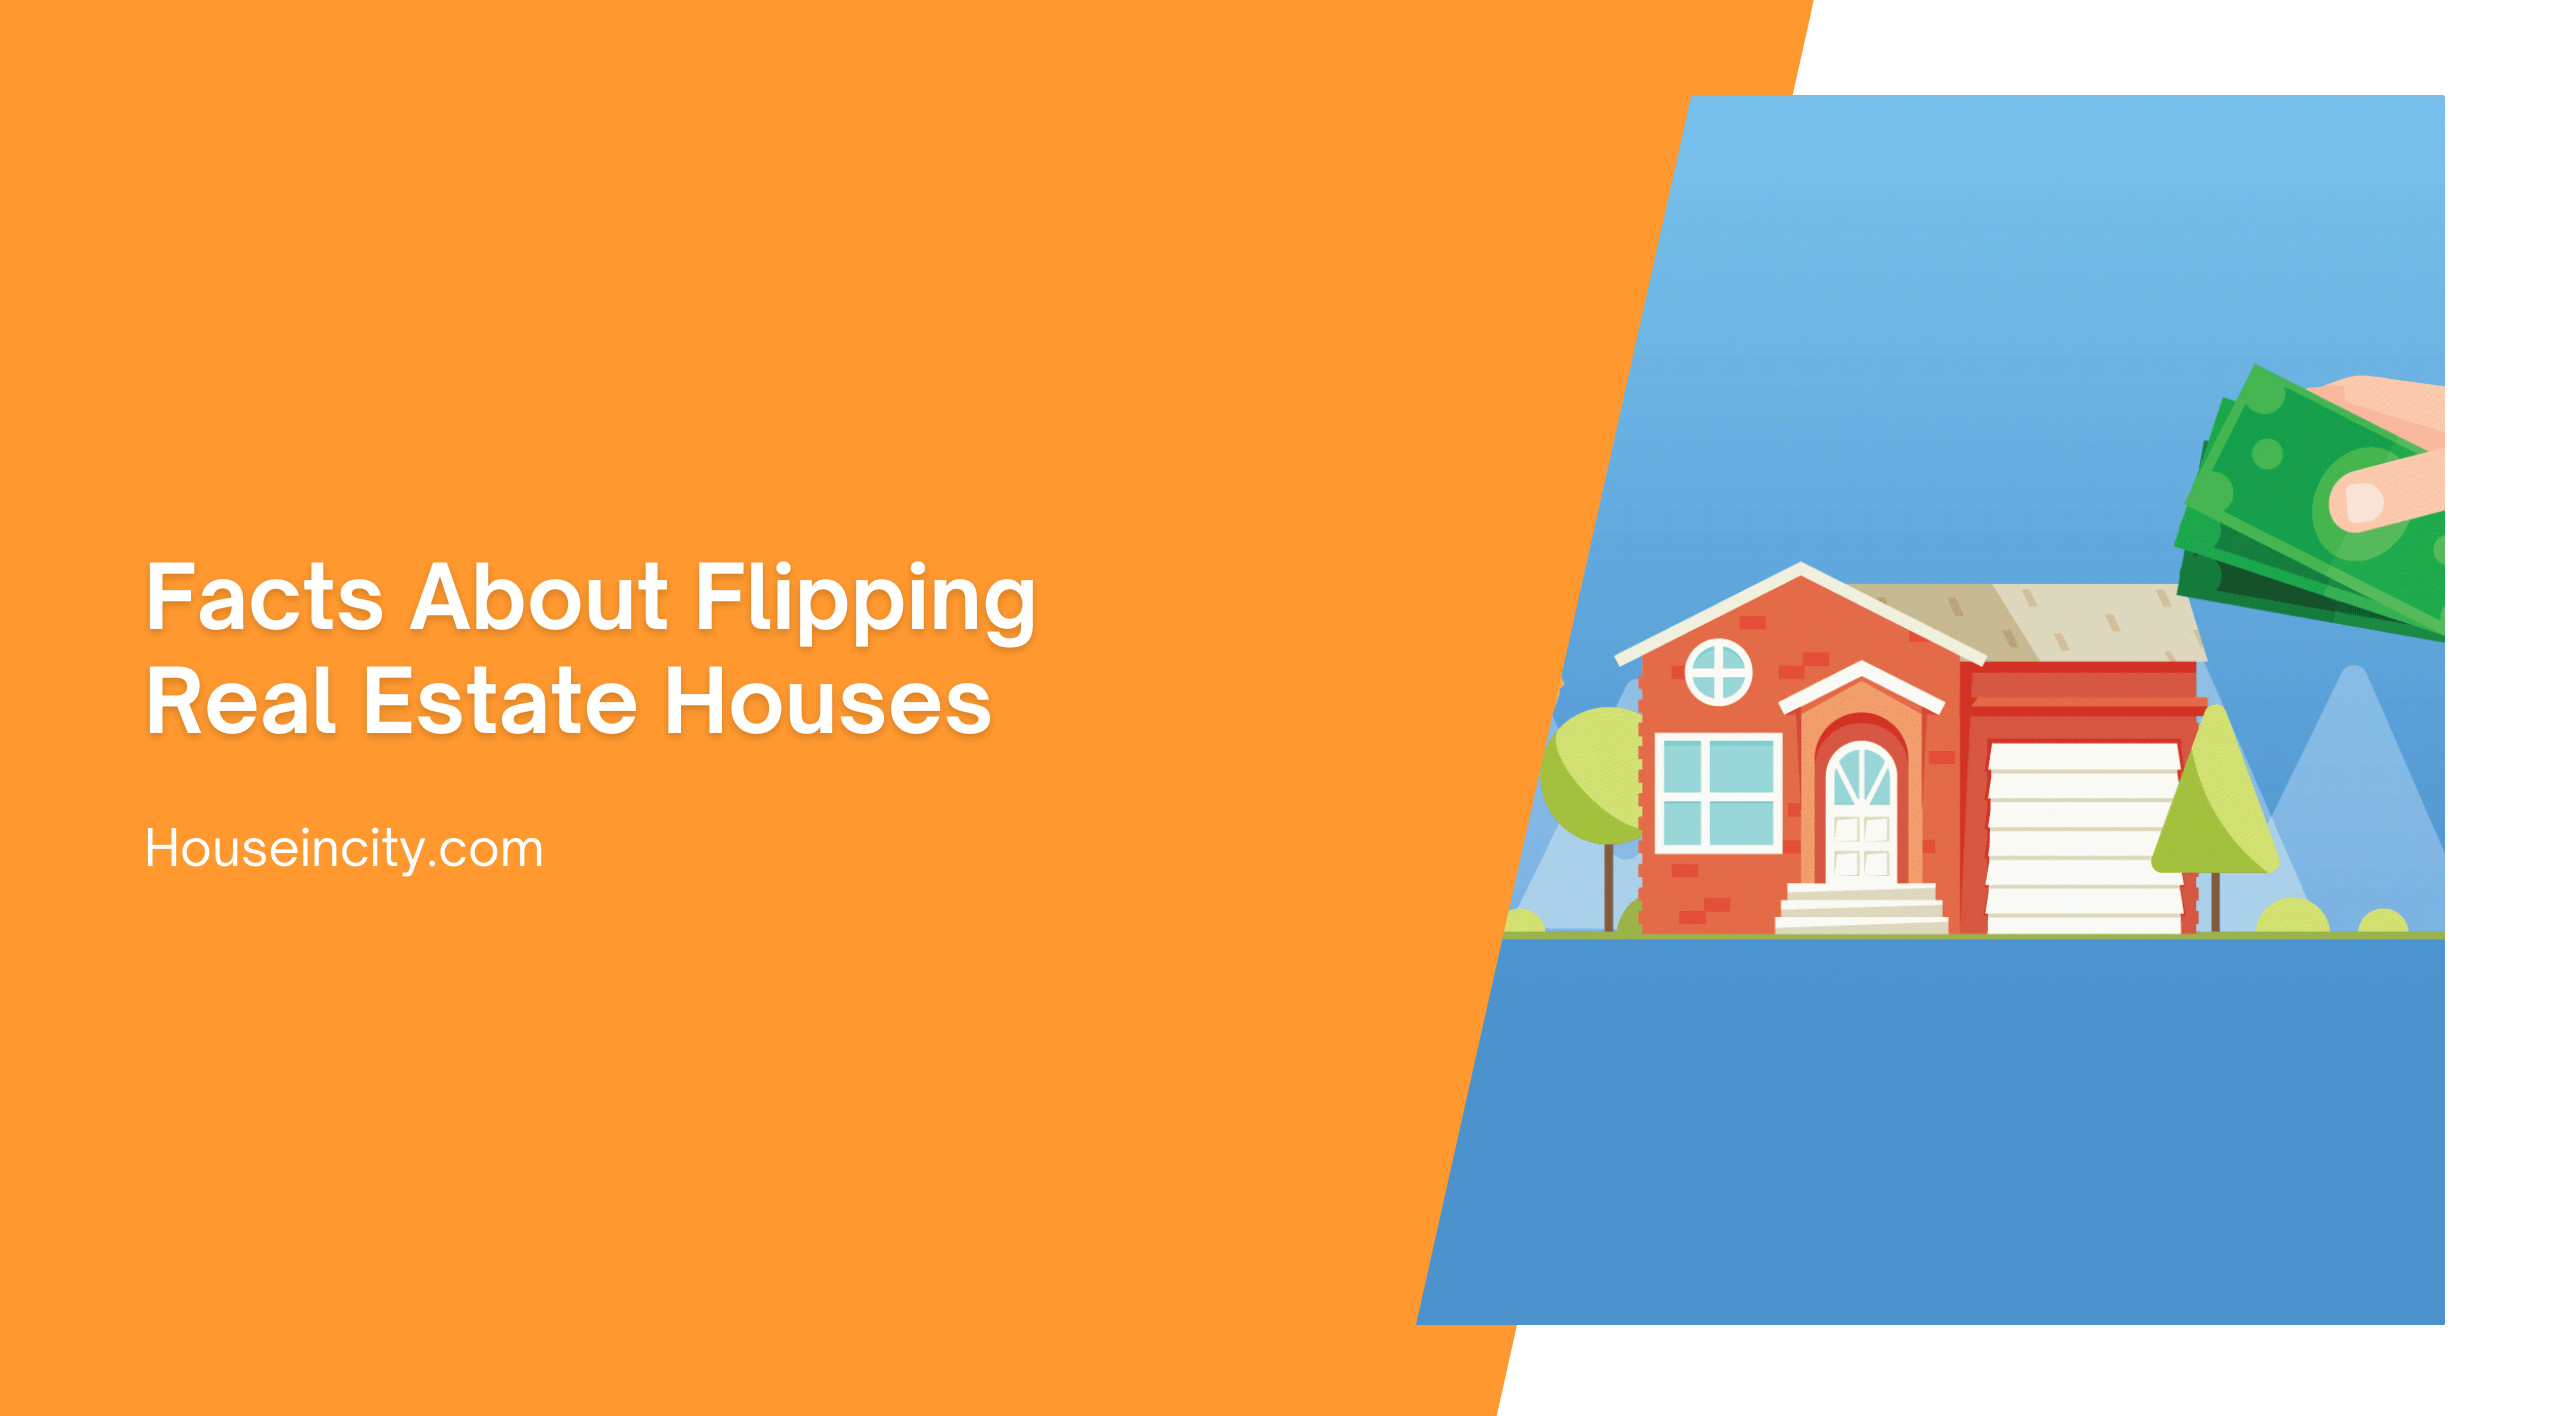 Facts About Flipping Real Estate Houses